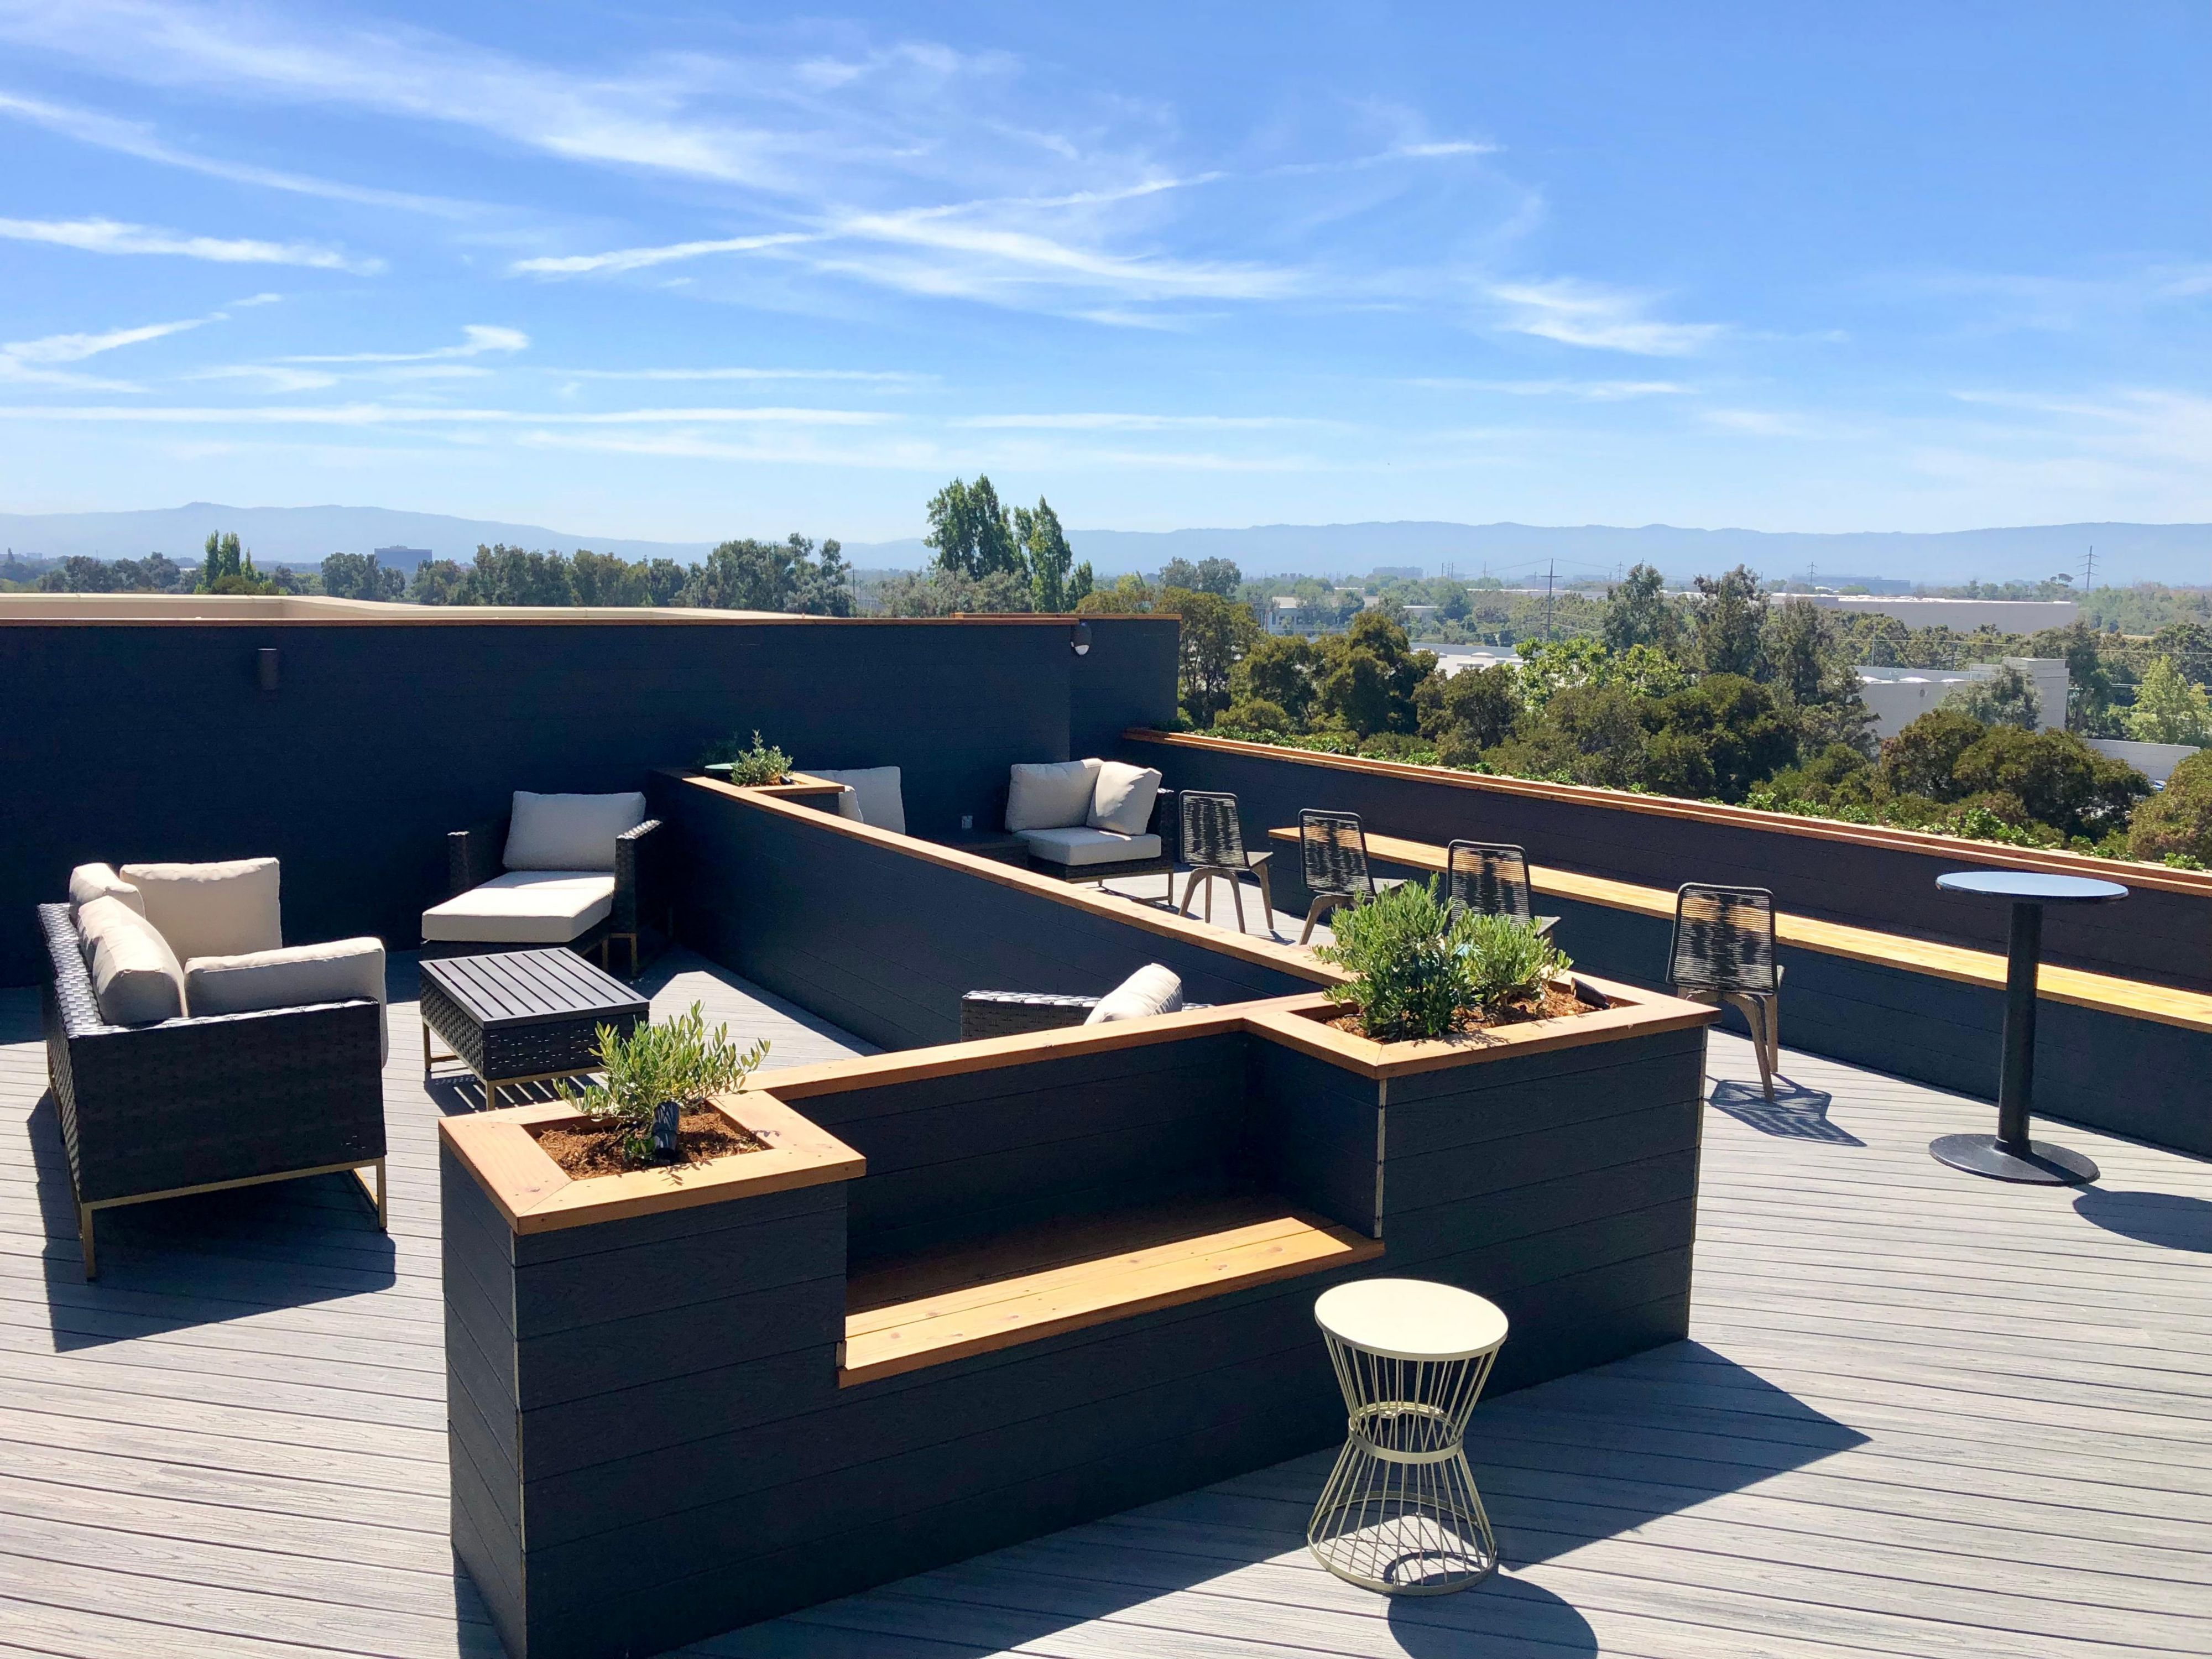 Enjoy your next event under the stars! Our Roof Top Deck is designed for group gatherings, a private dinner or a cocktail social. Contact our Sales Department for more details sales@holidayinnsiliconvalley.com 